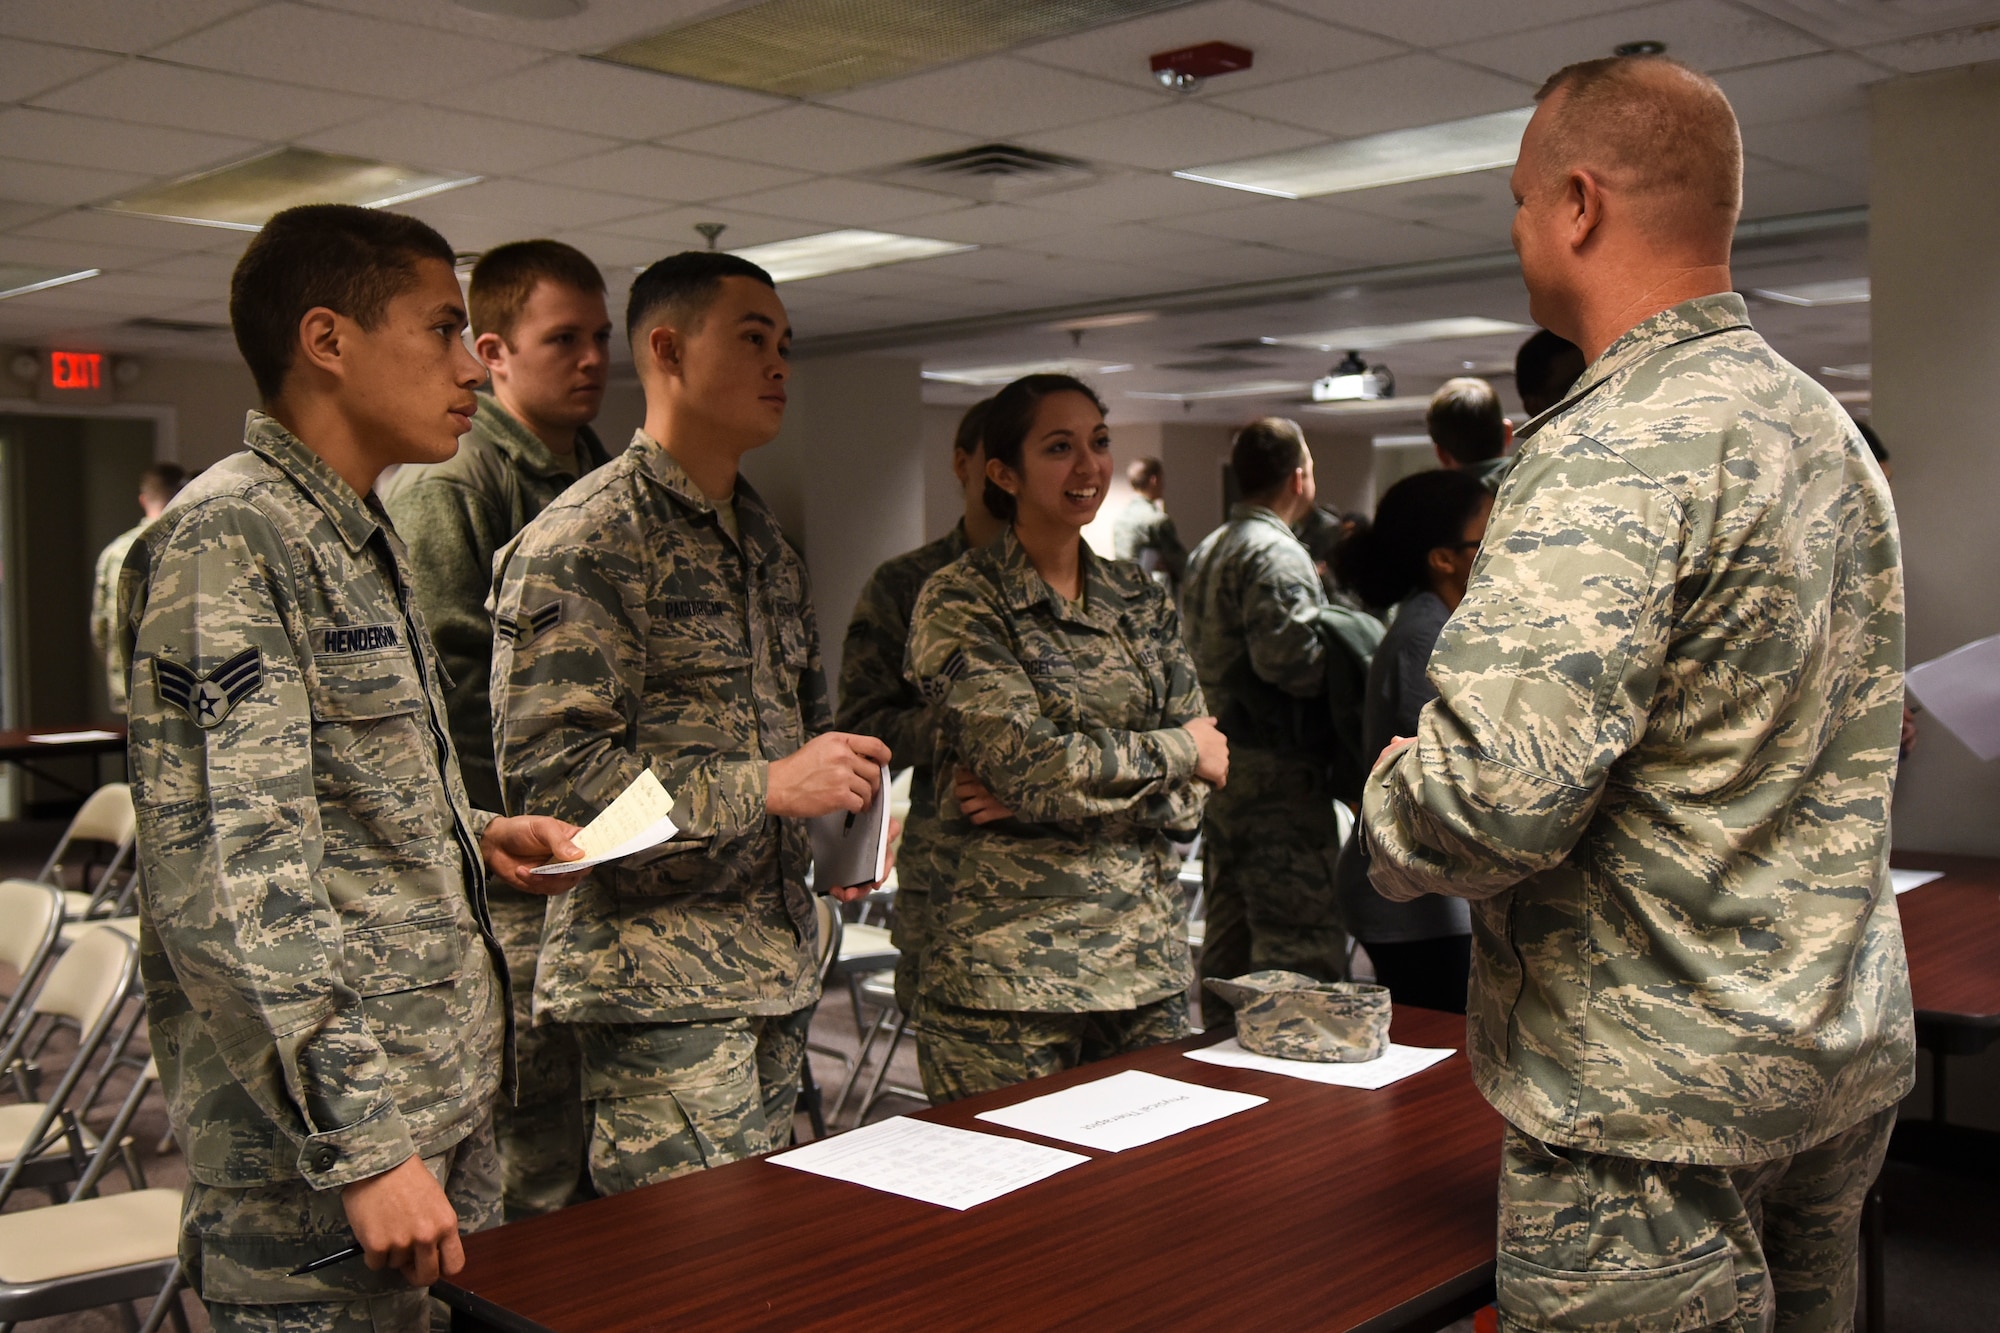 Maj. Joseph Kirkman (right), 4th Medical Operations Squadron physical therapist, speaks to a group of Airmen during a medical commissioning brief, Feb. 9, 2016, at Seymour Johnson Air Force Base, North Carolina. Airmen had the opportunity to directly ask questions about the commissioning process with multiple officers of the 4th Medical Group. (U.S. Air Force photo/Airman Shawna L. Keyes)